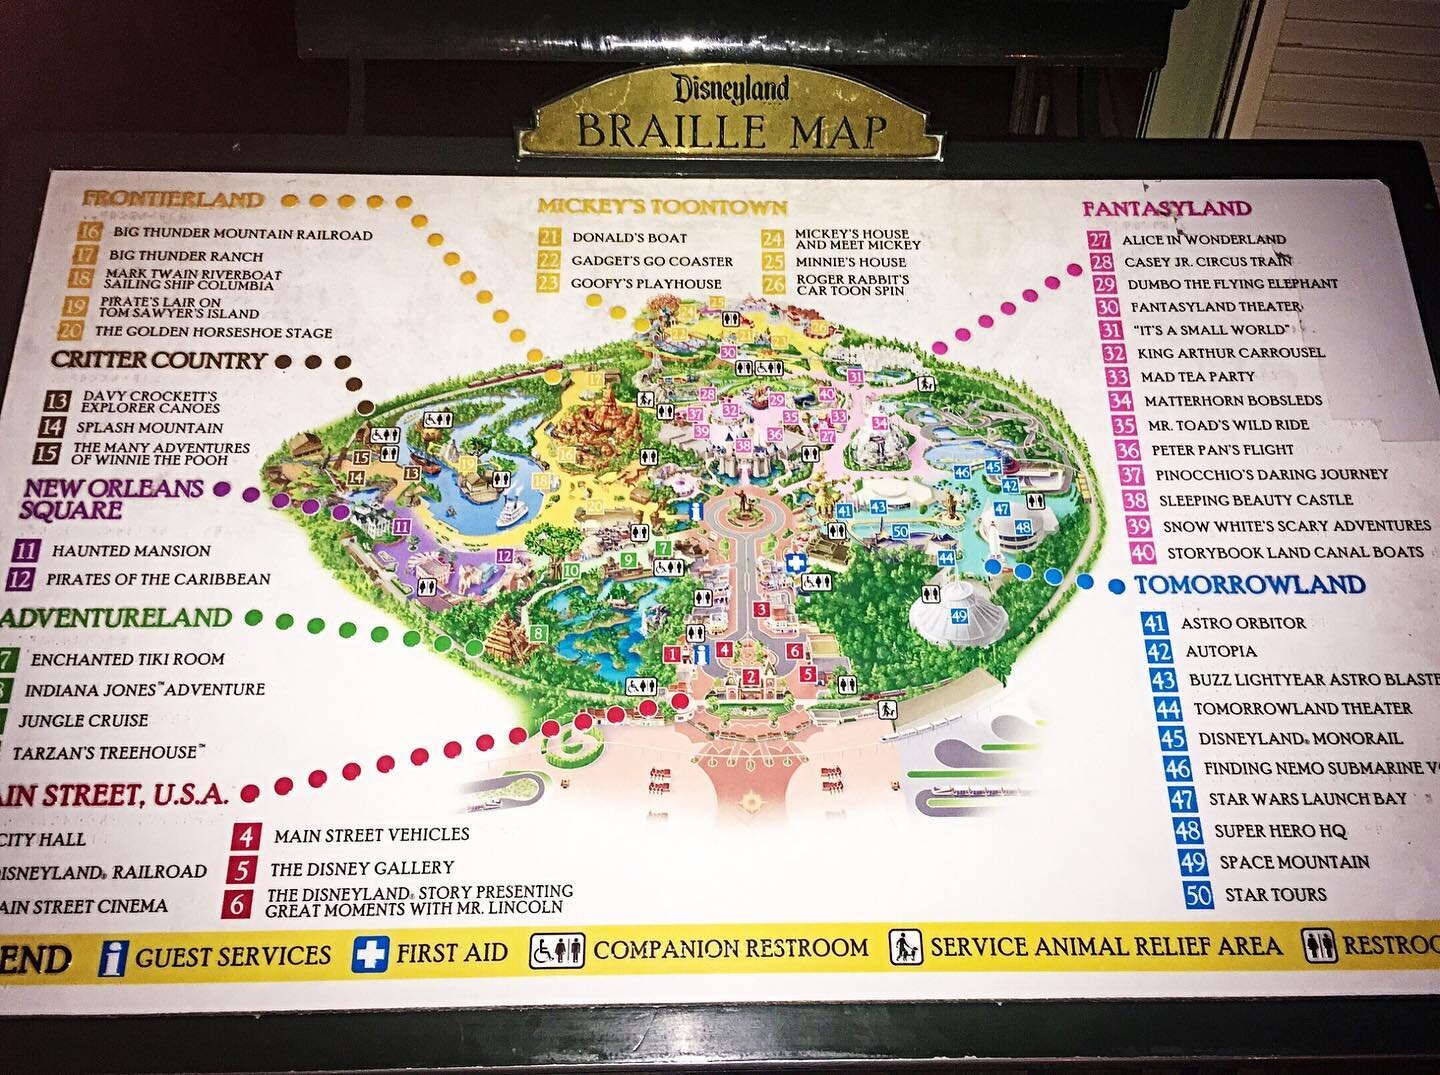 Did you know Disneyland has a Braille map?
⁣
If you look really closely, you can see the raised bumps under the black text on the map!
⁣
Braille uses combinations of six dots arranged in two columns and three rows to represent letters and numbers as 